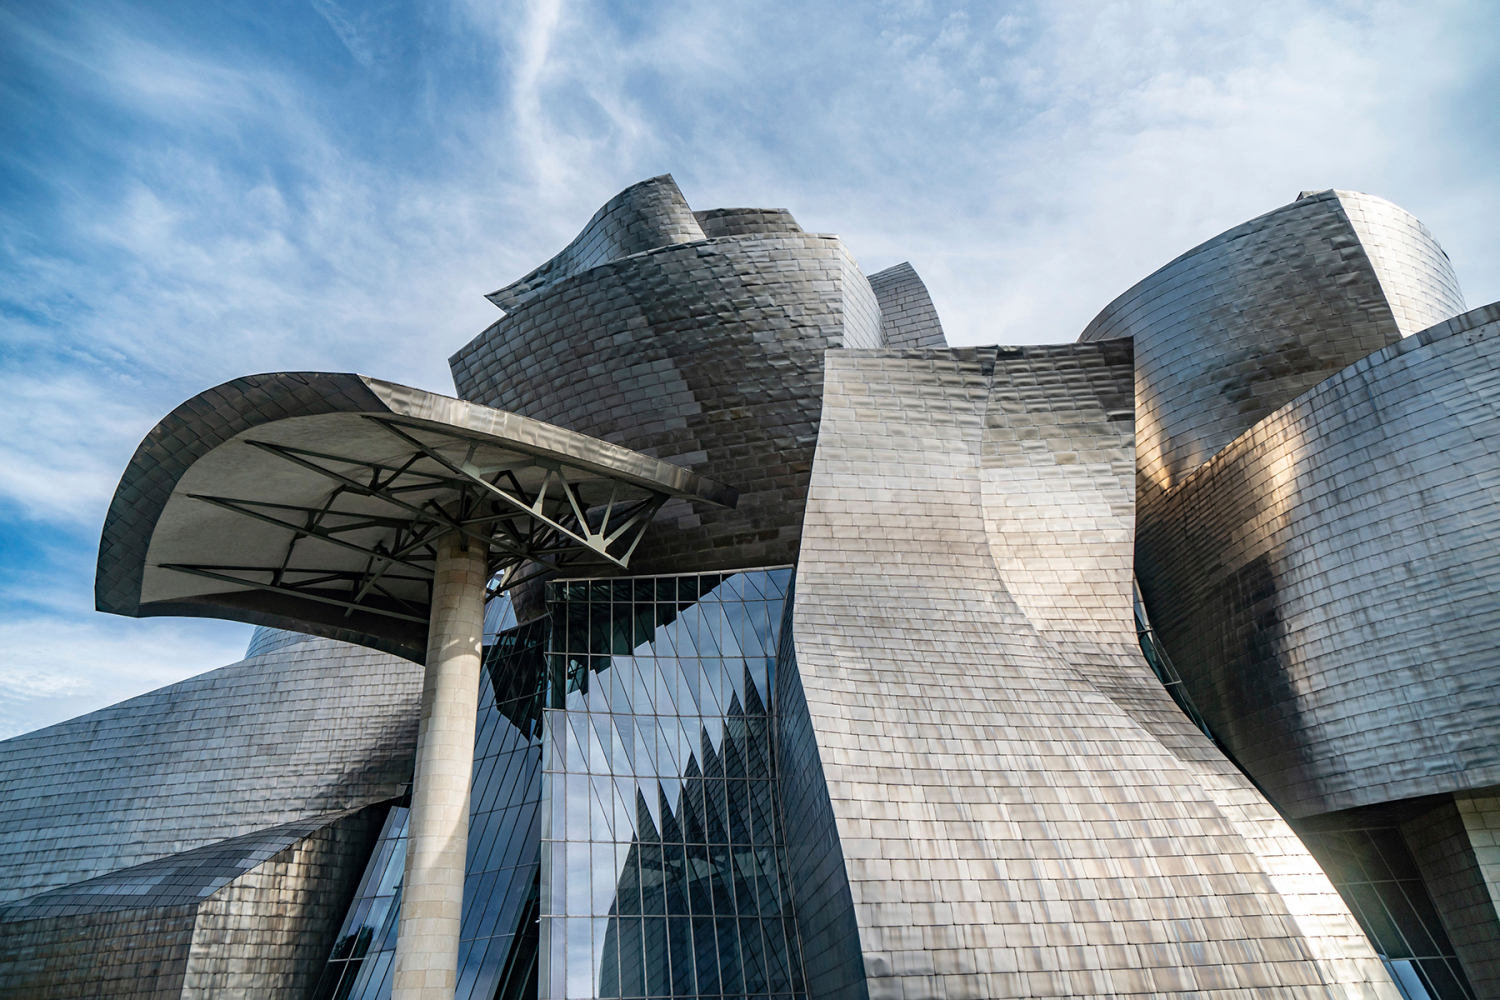 23 June 2019, Spain, Bilbao: The Guggenheim Museum in Bilbao. The building is one of the most famous works by the architect Frank Gehry. The museum, which cost around 140 million euros at the time, was opened in 1997. Photo by: Frank Rumpenhorst/picture-alliance/dpa/AP Images